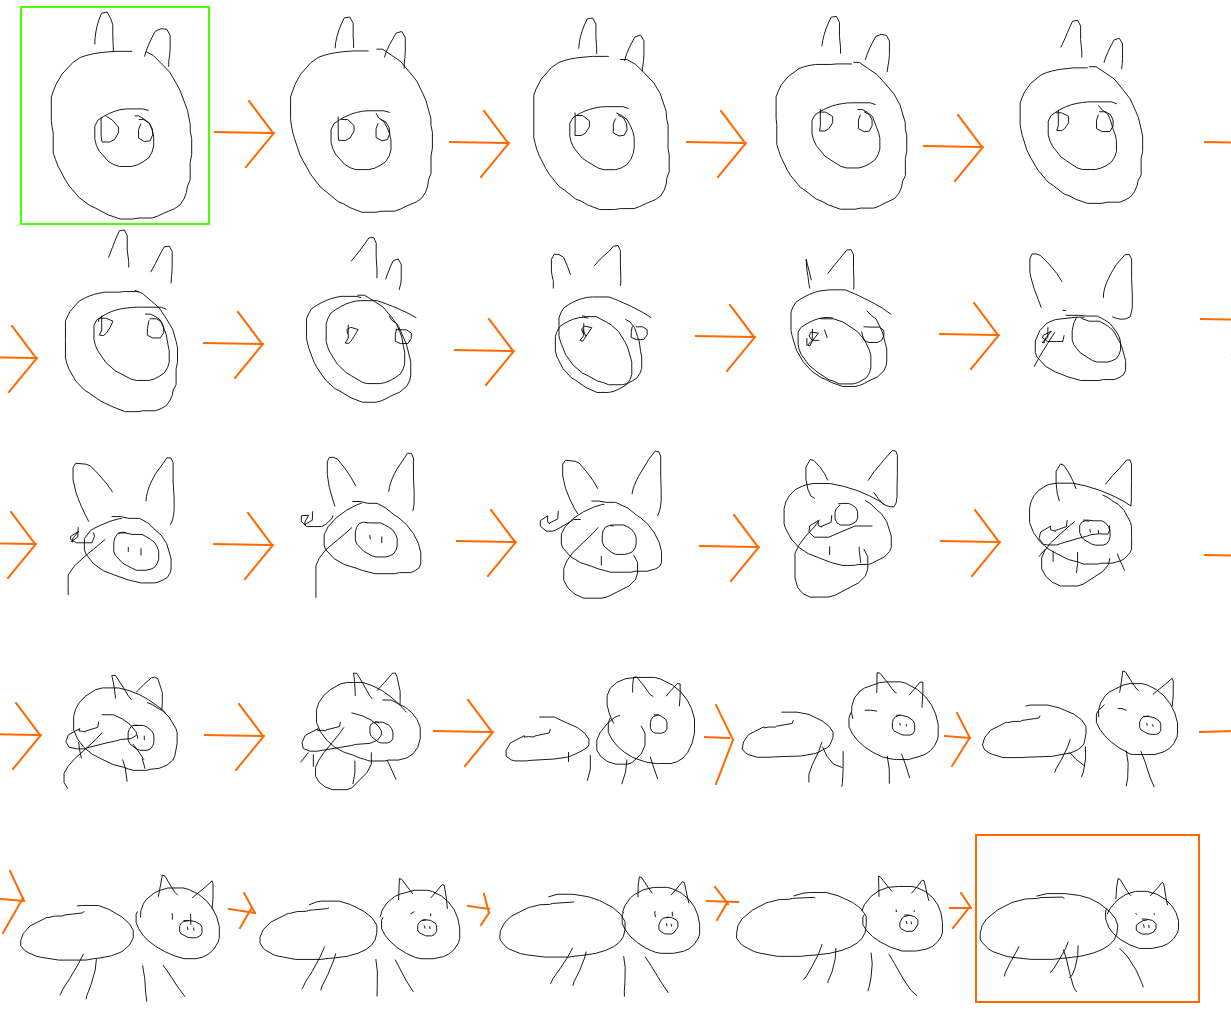 Latent space of cats and firetrucks generated by sketchrnn  Download  Scientific Diagram